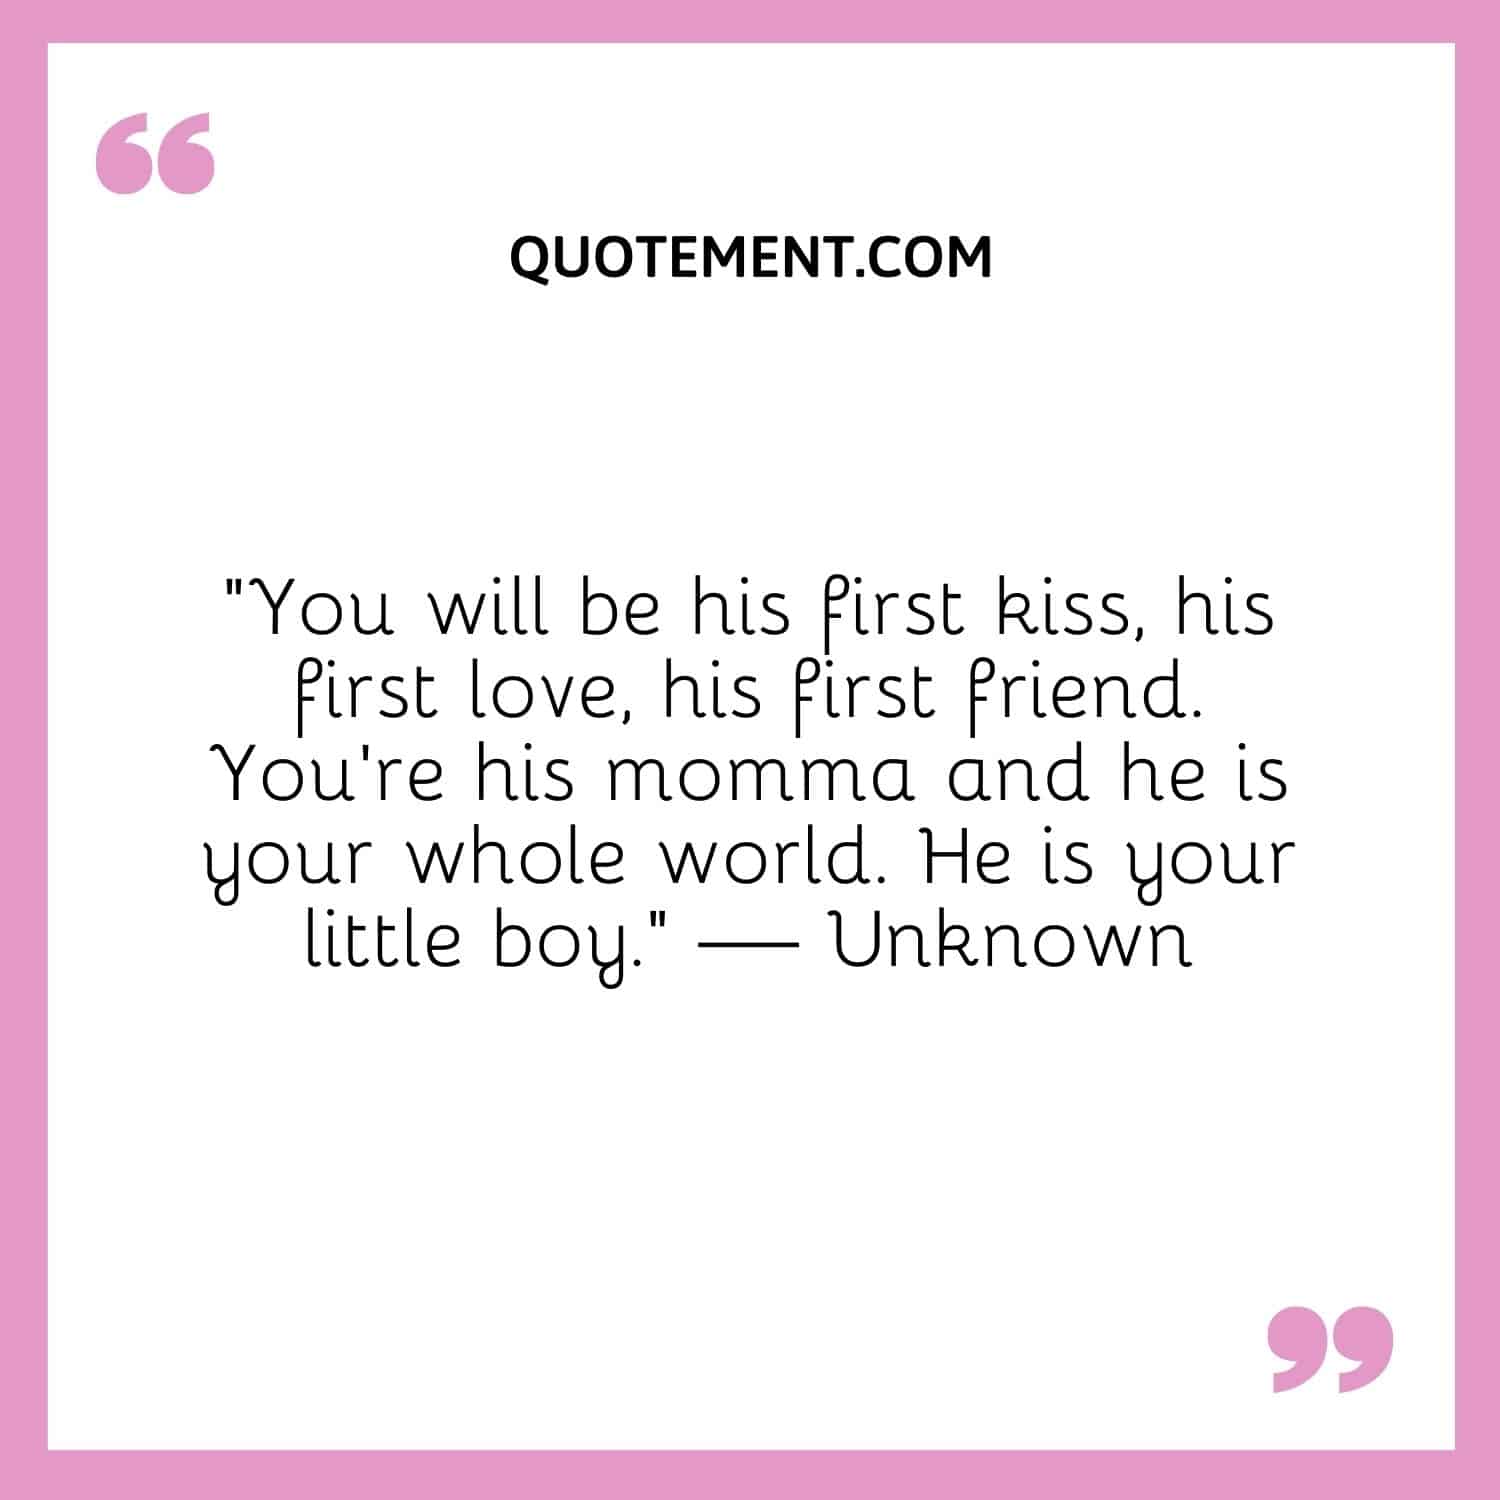 You will be his first, his first love, his first friend.